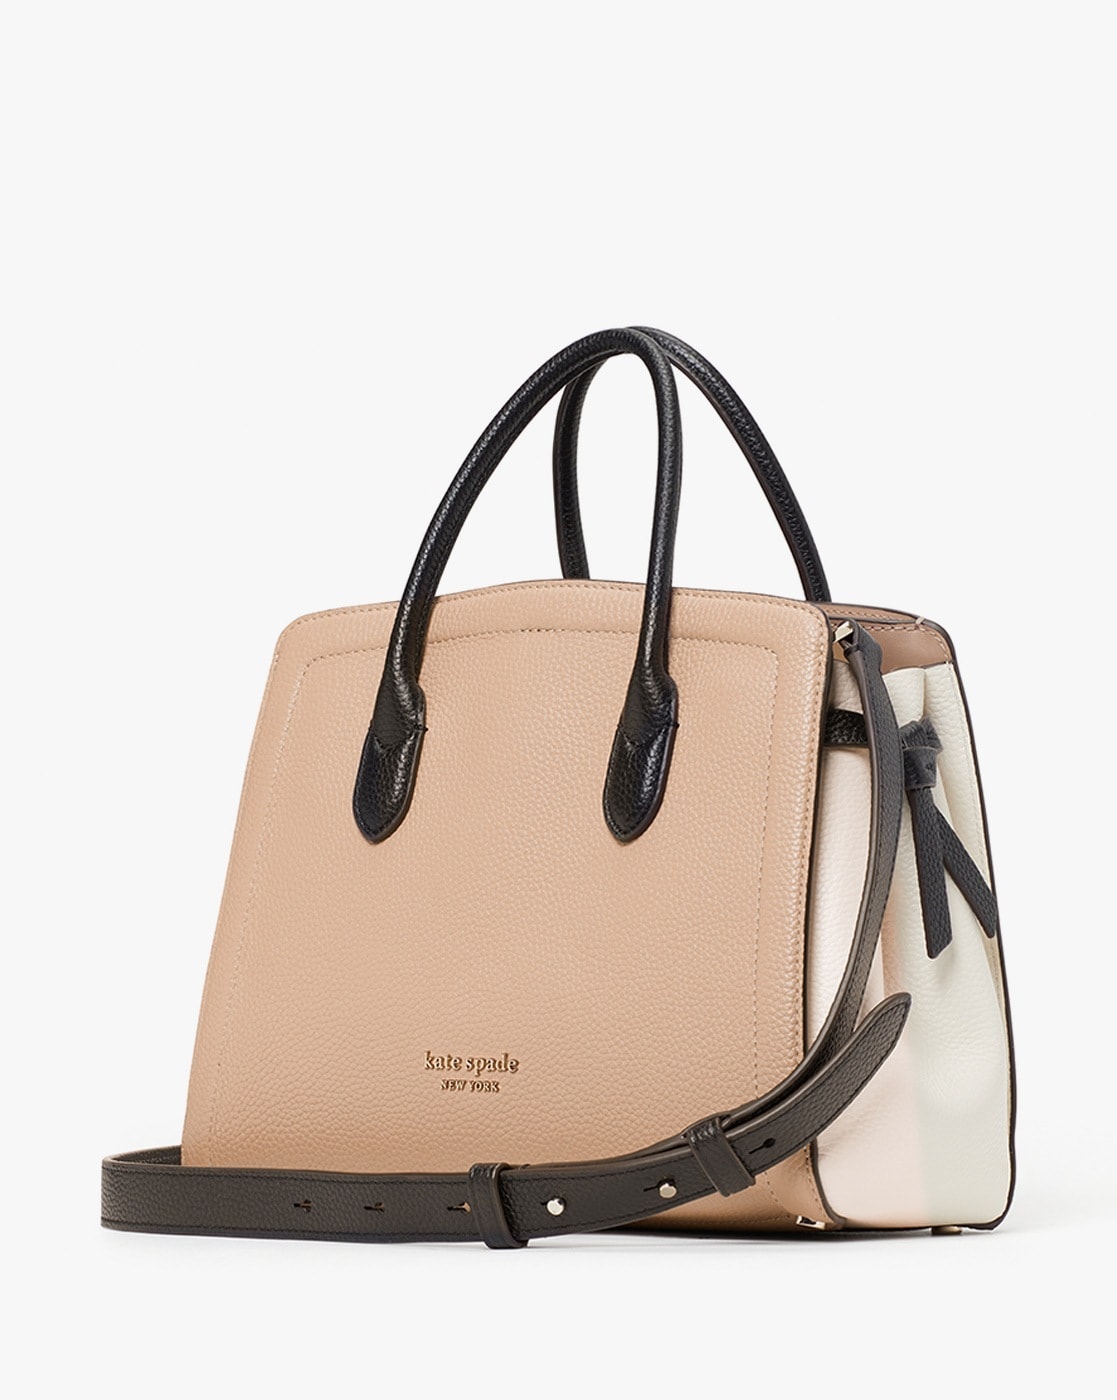 kate spade new york Knott Colorblock Large Leather Tote Bag